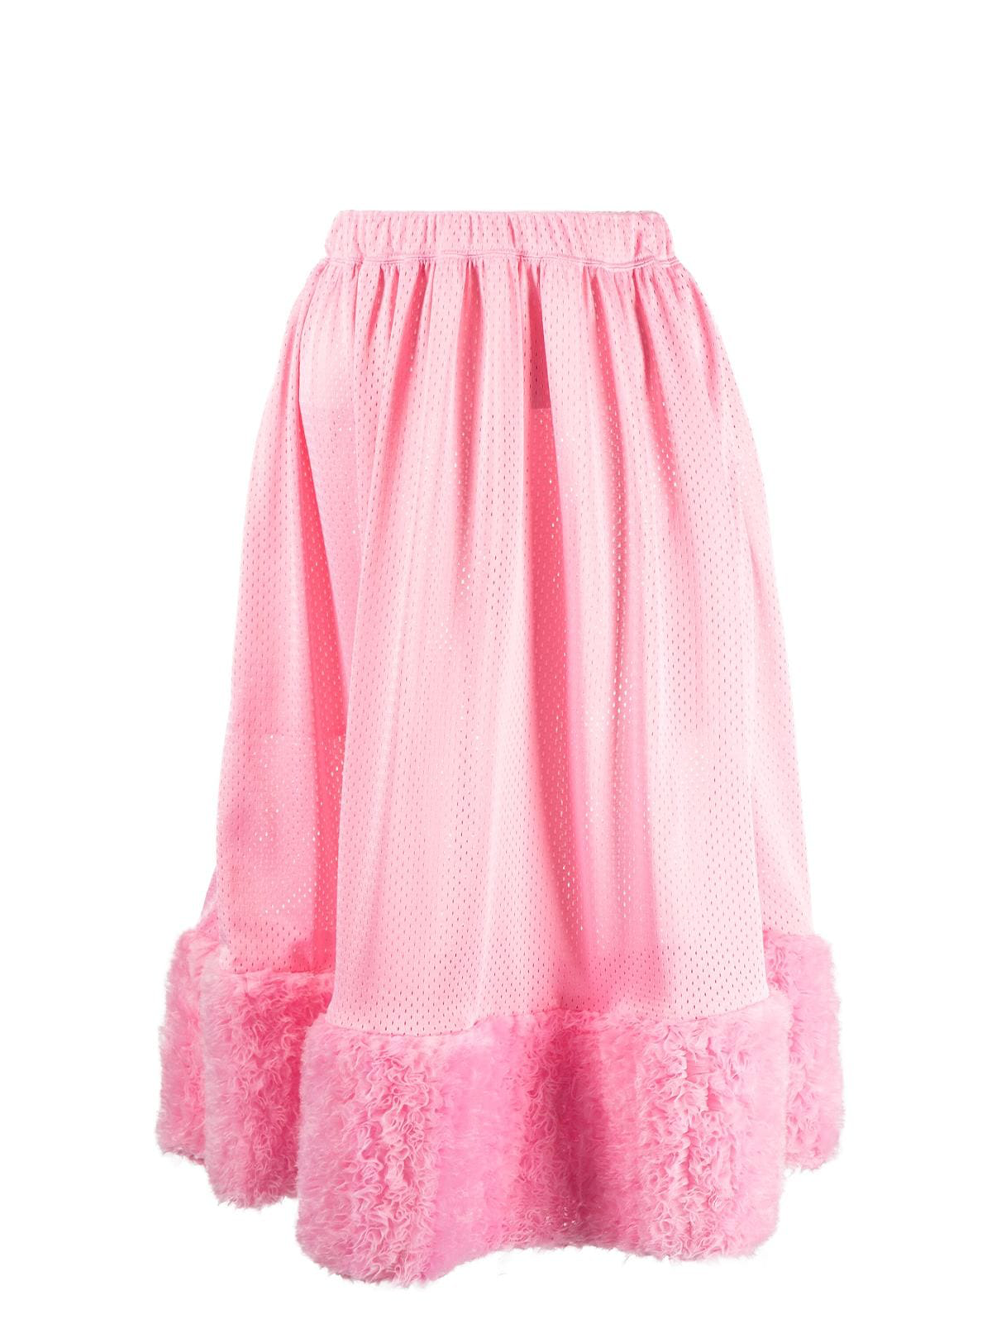 COMME des GARCONS GIRL Organdy Frill Embroidery Skirt Pink 1